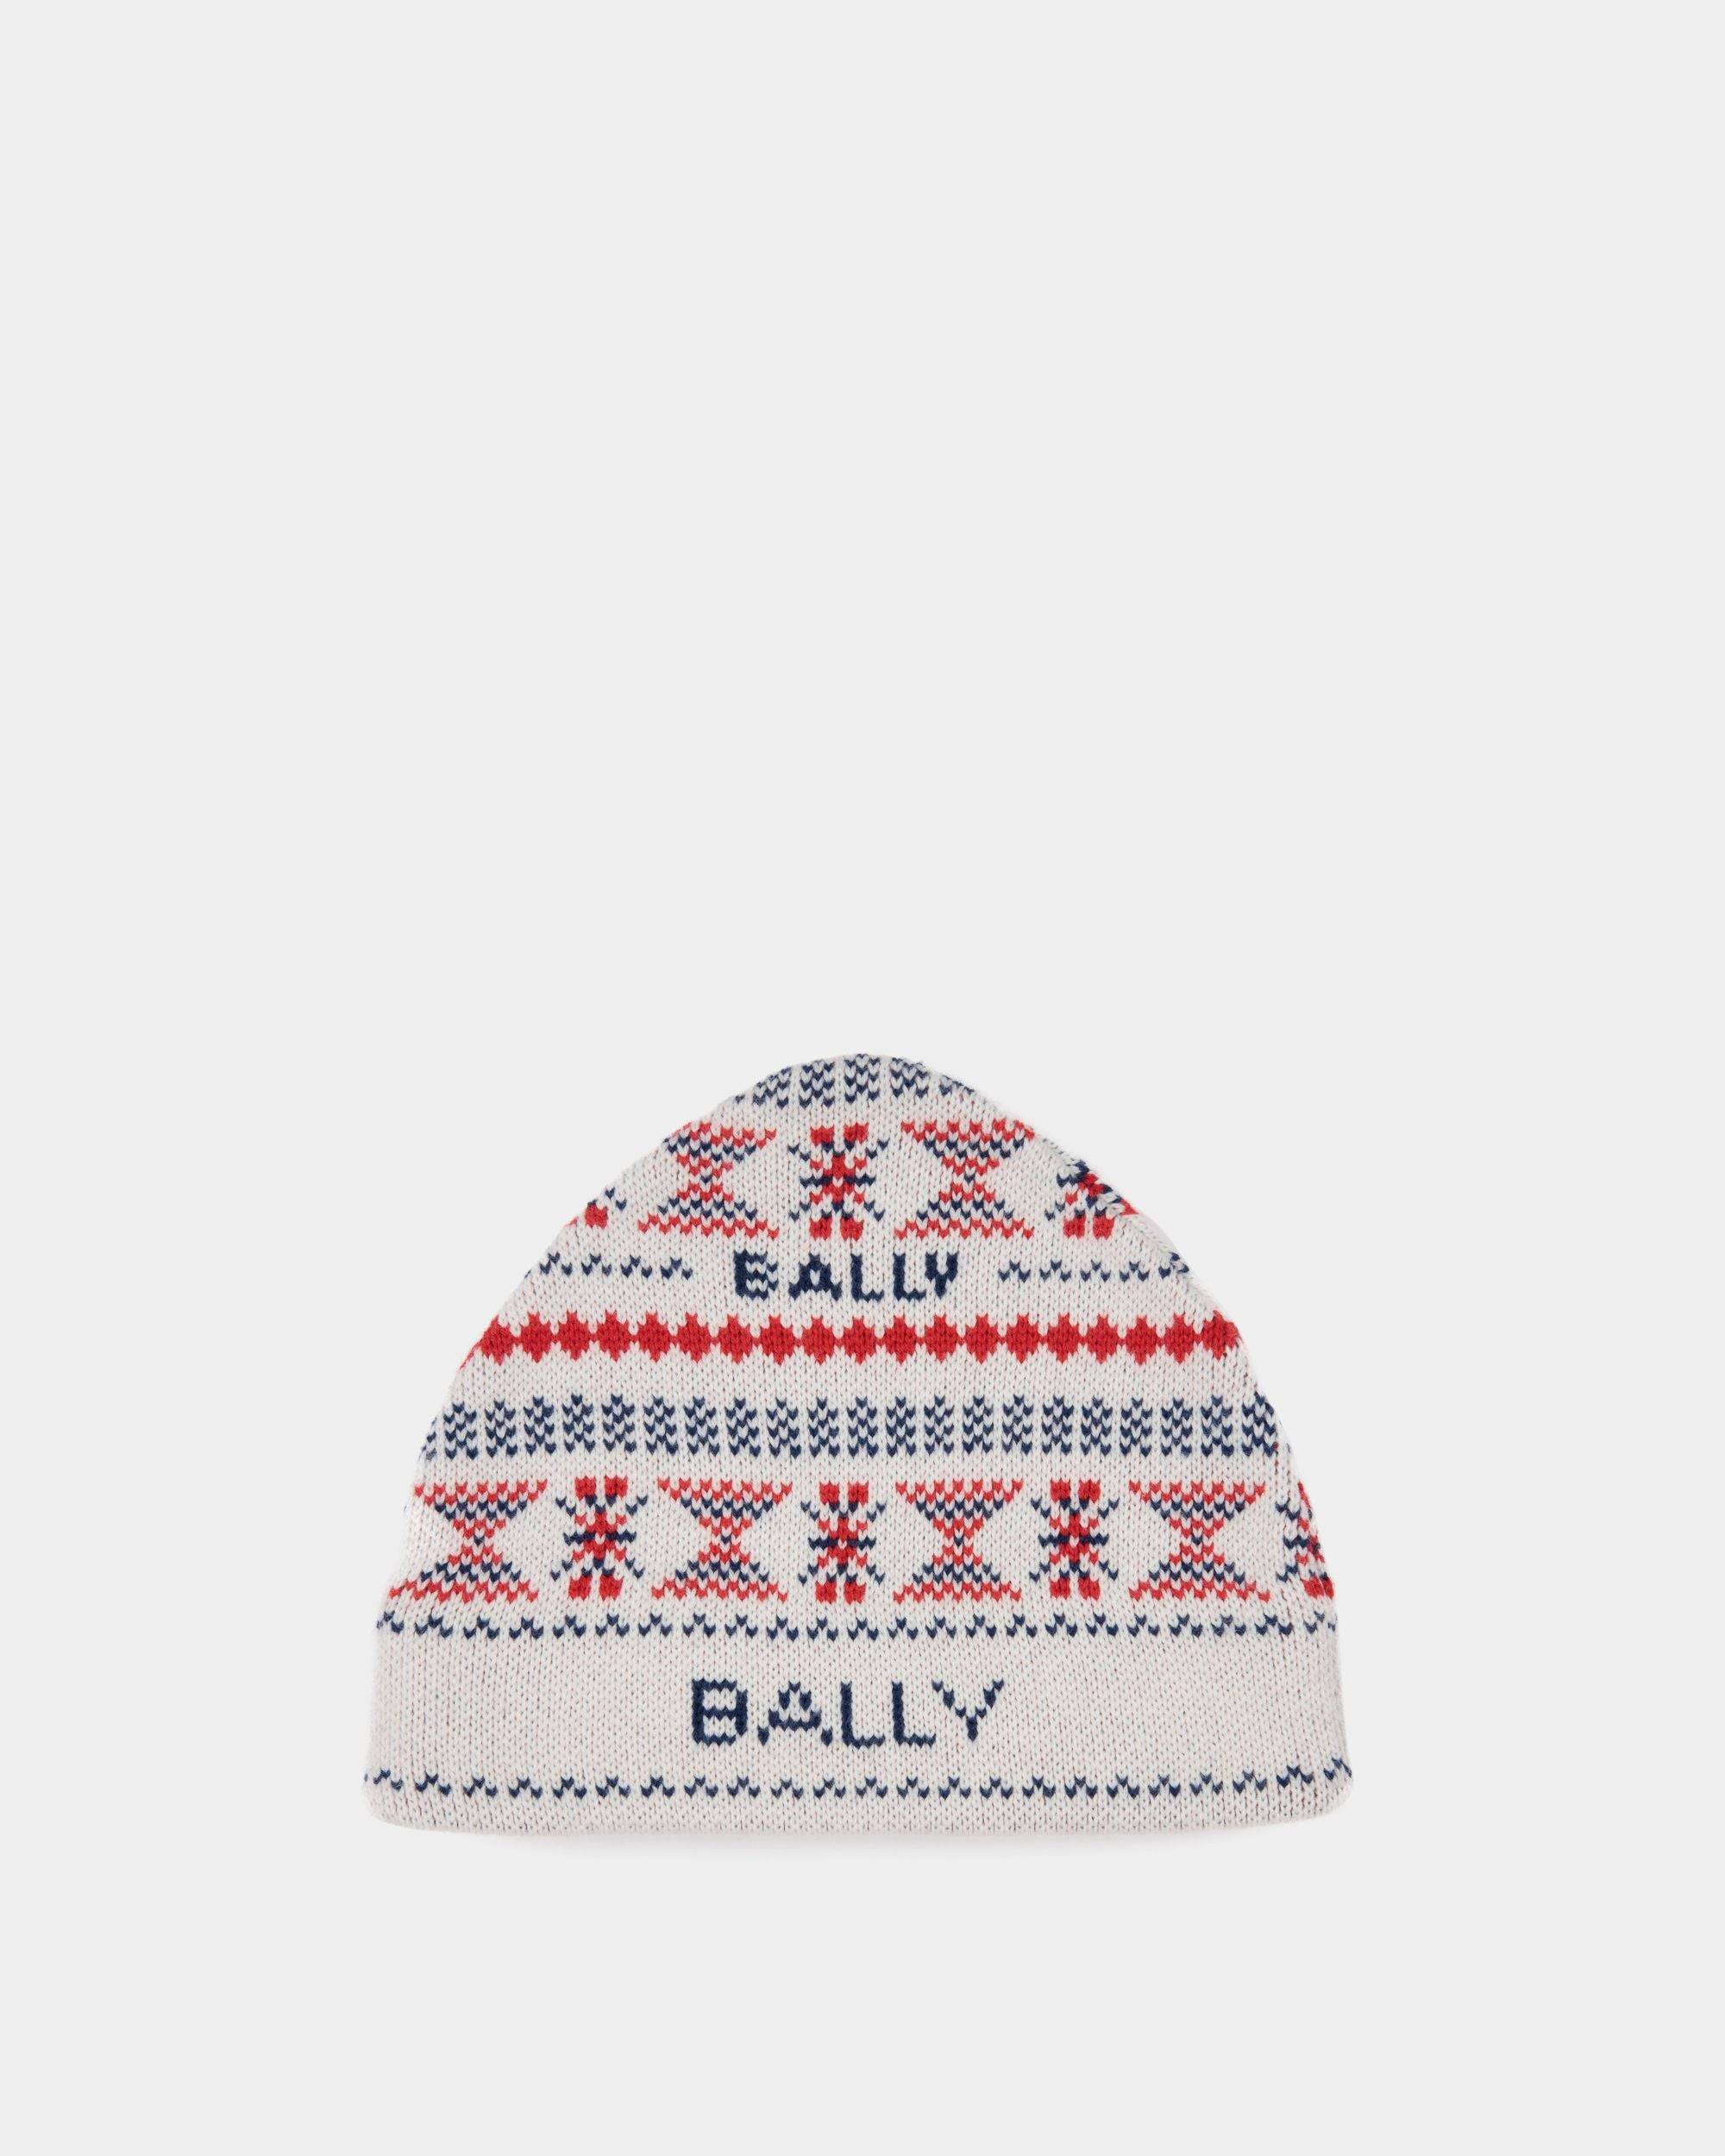 Men's Multicolor Beanie in Wool | Bally | Still Life Front